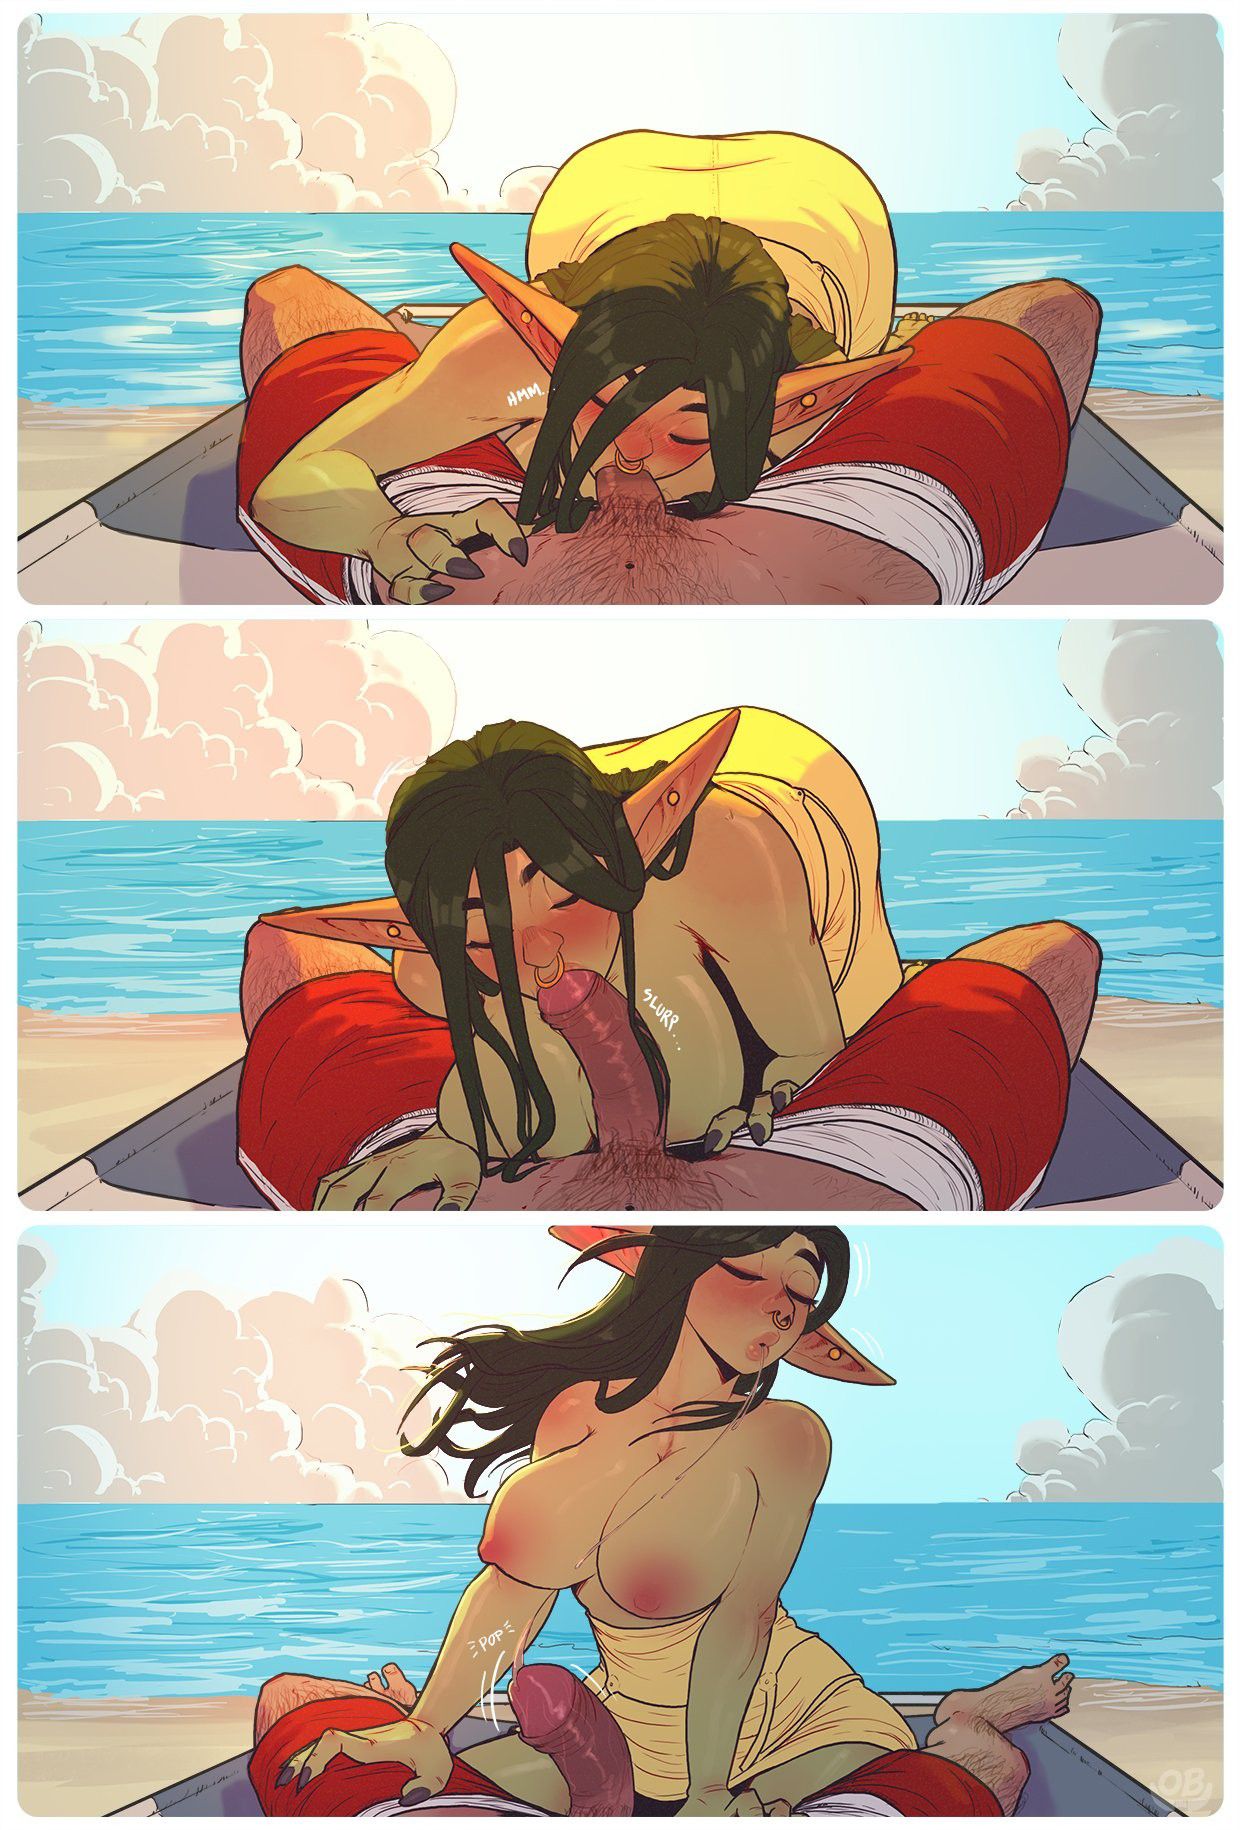 [Orcbarbies] Beach Day in Xhorhas [Ongoing] [Spanish] 17